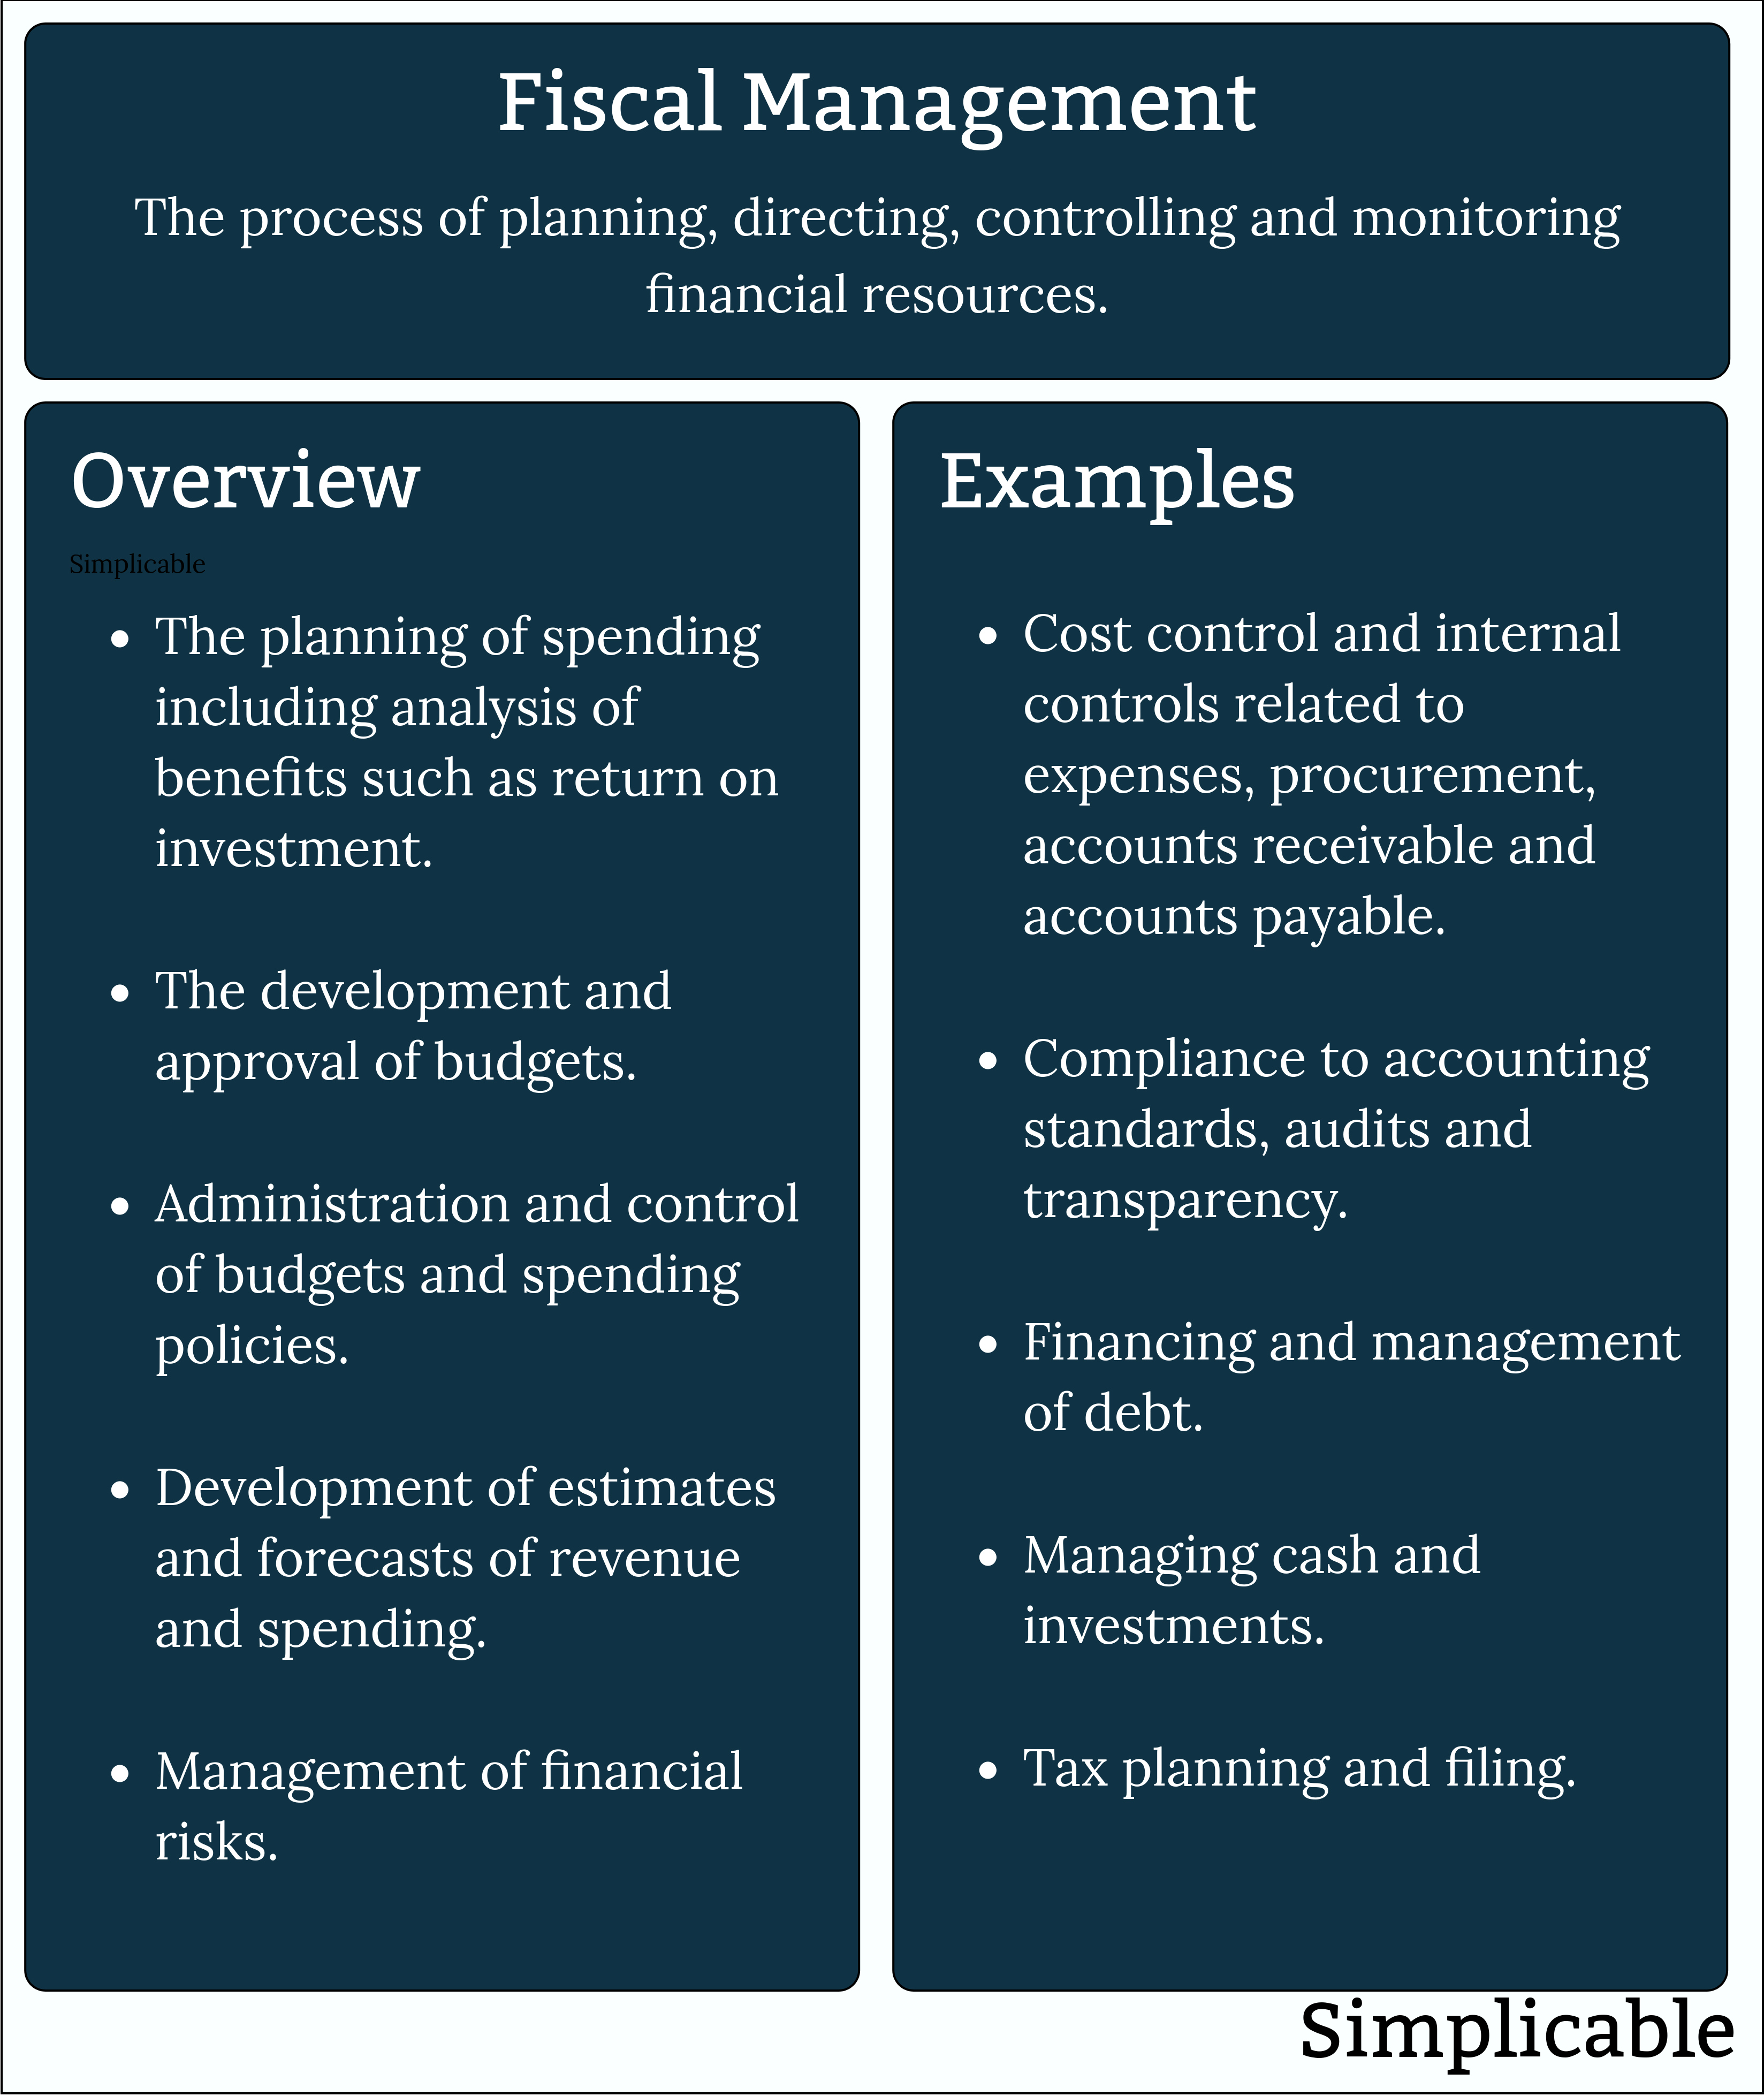 fiscal management overview and examples